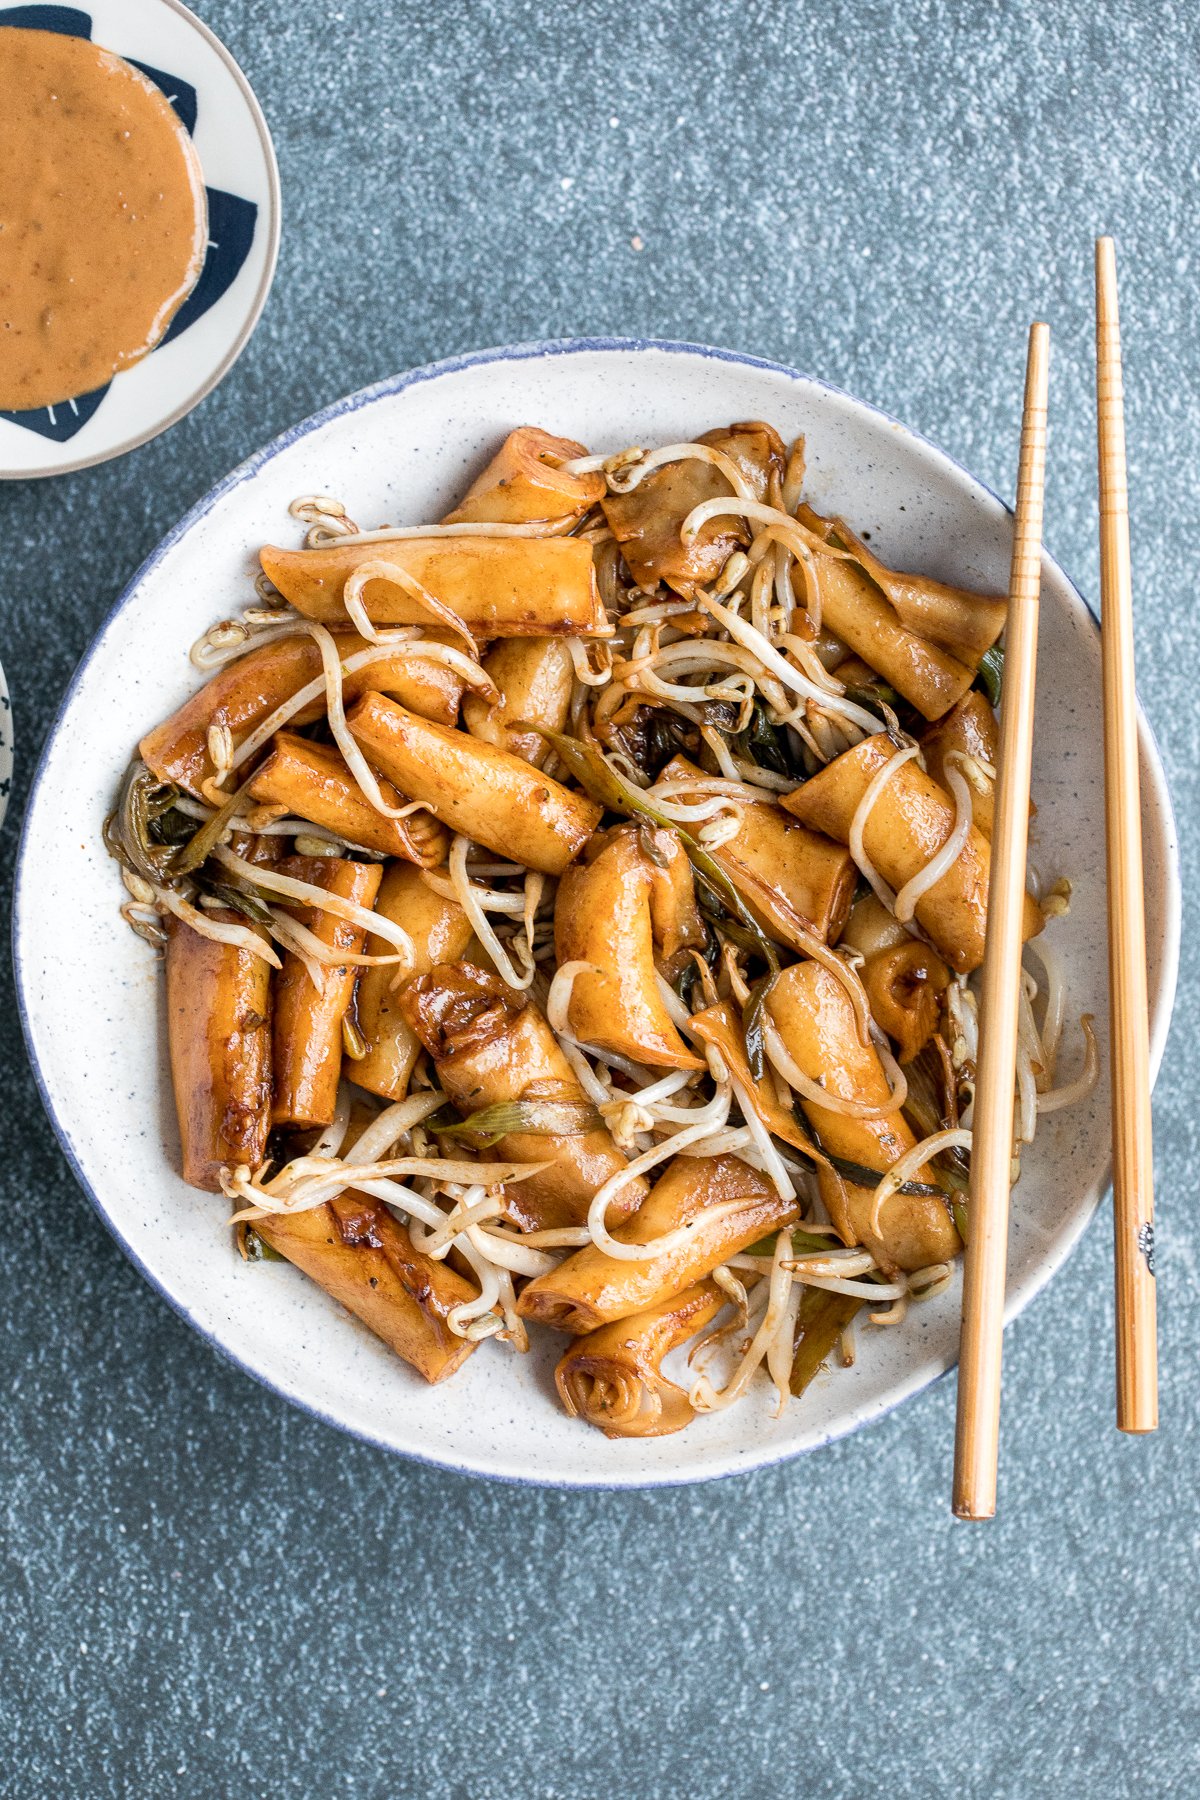 Stir-Fried Rice Noodle Rolls with Peanut Butter Sauce